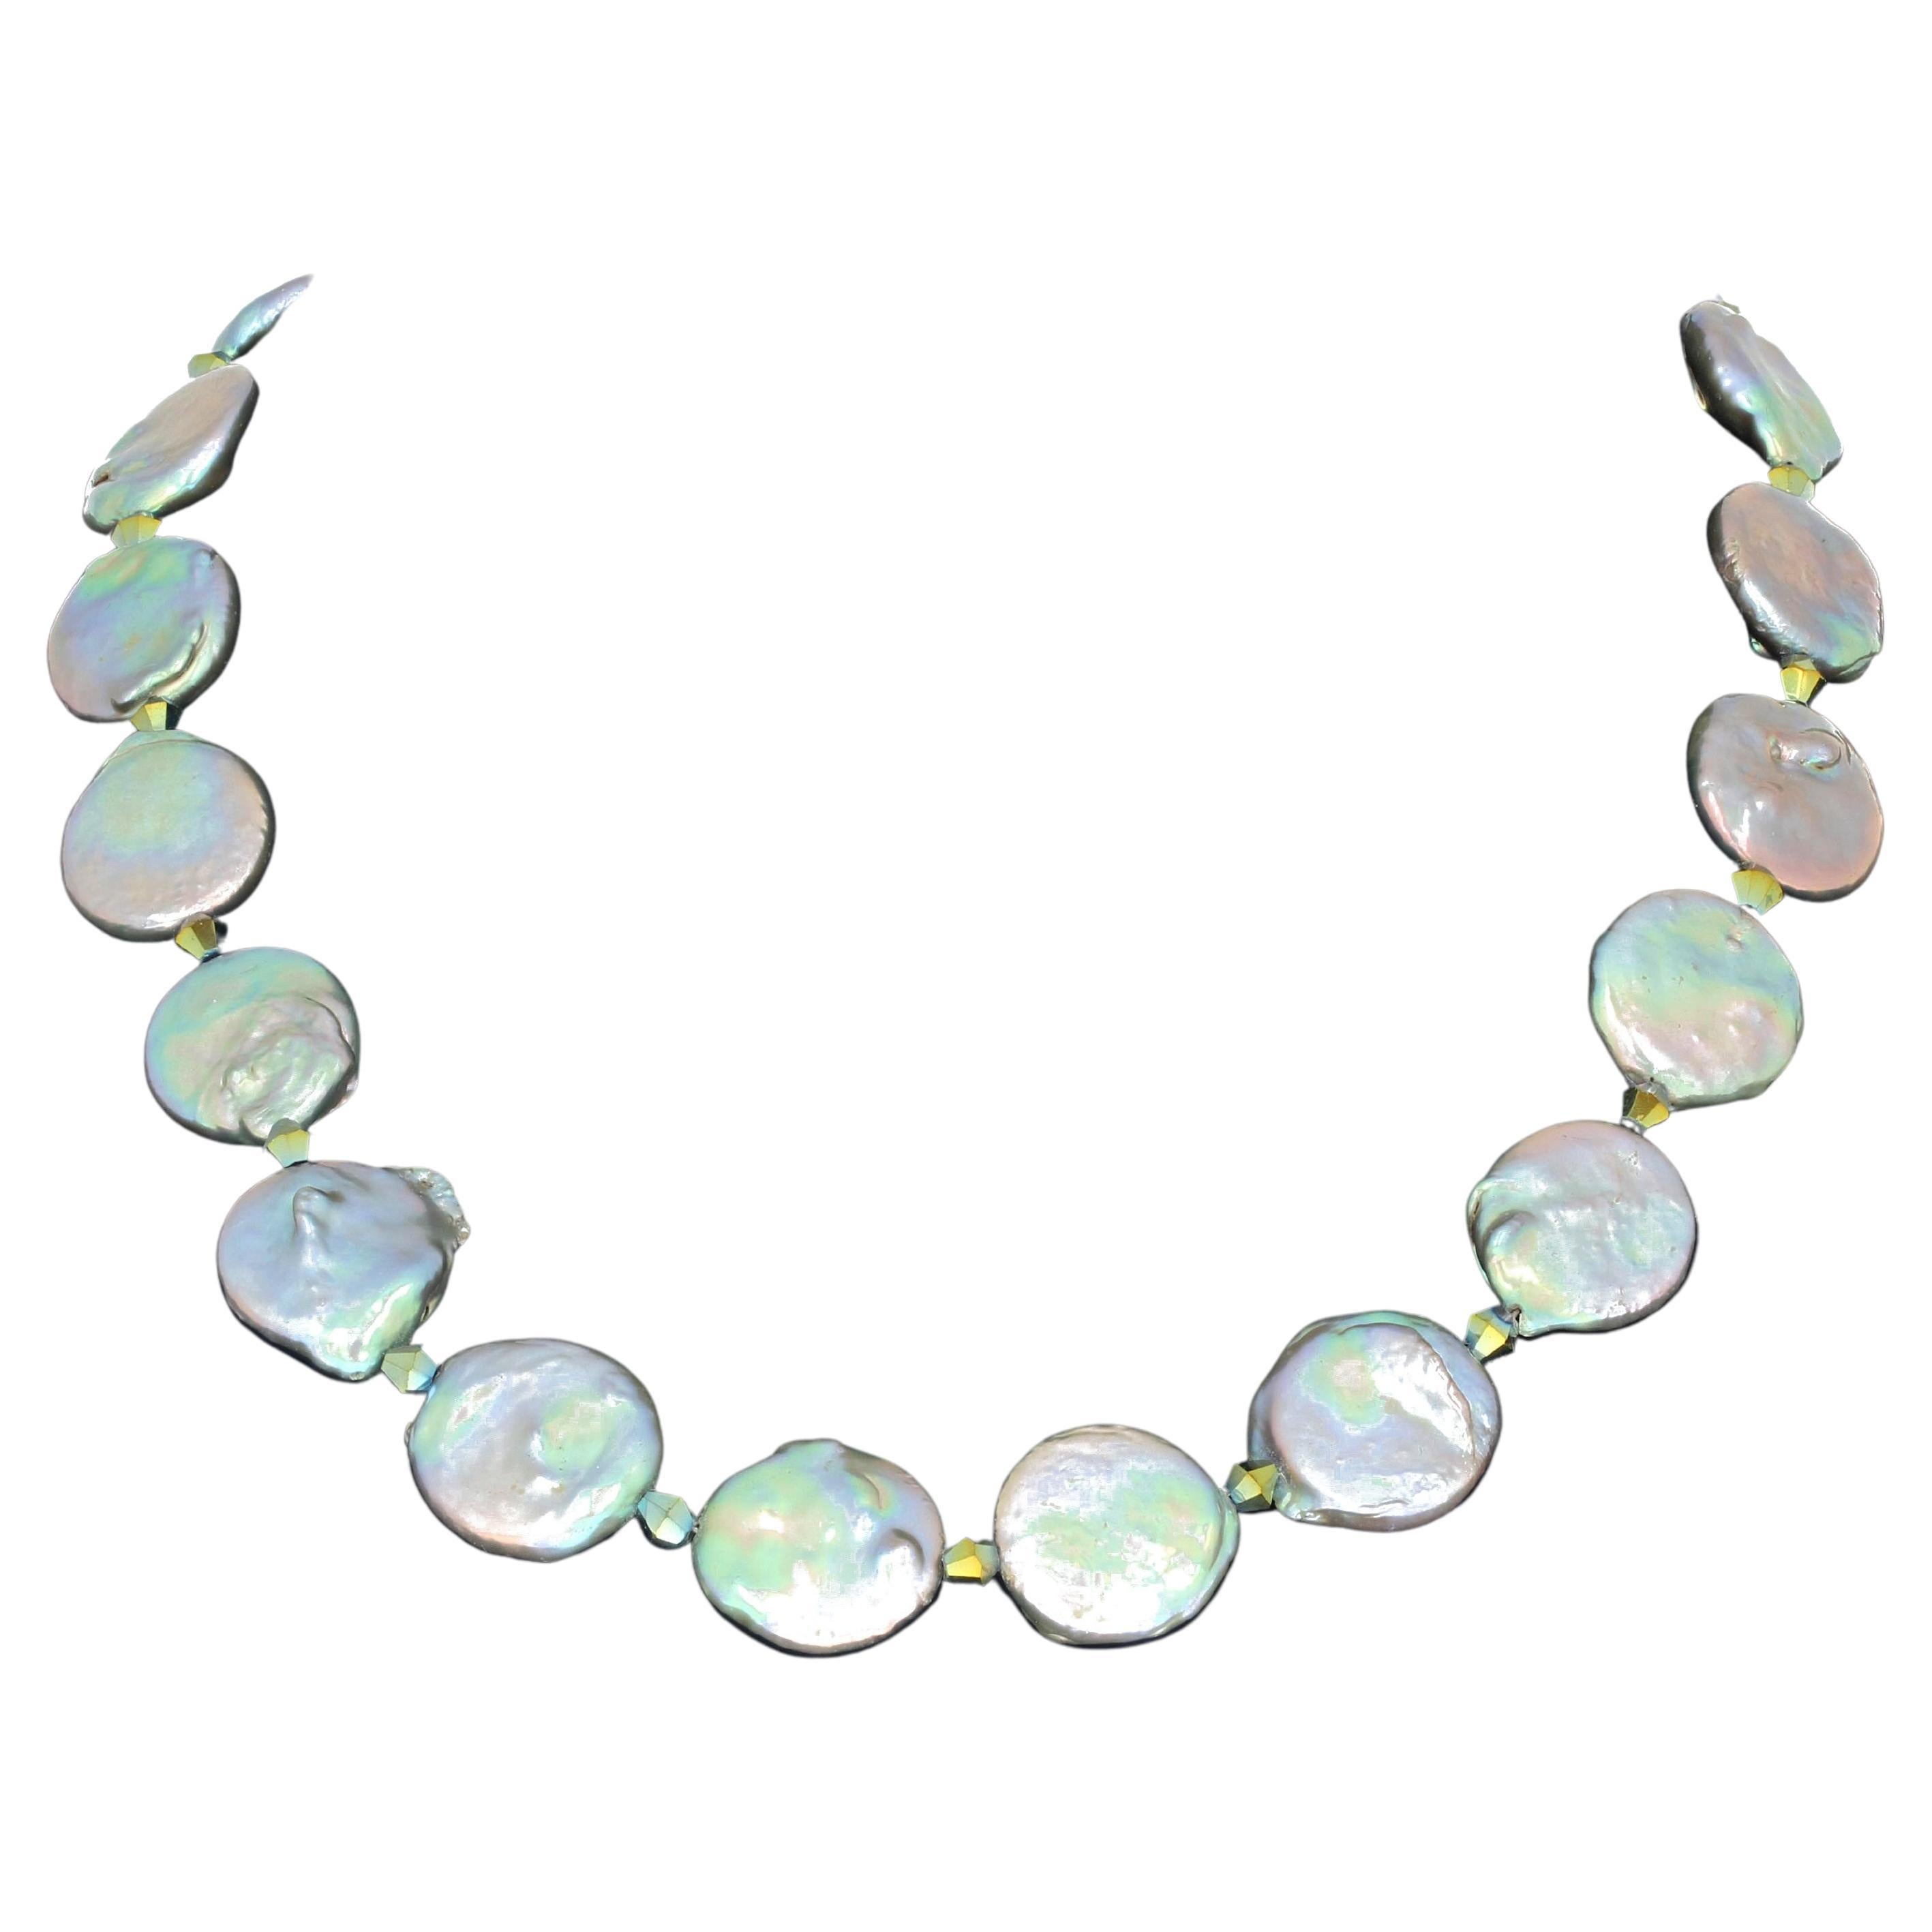 This glowing 17.25 inch long Coin Pearl necklace set with a silver tone clasp is enhanced with little Czech crystal sparkles.  Depending on what light you are in the pearls glow many colors of silver or blue or green  or pinkish reflections.  The